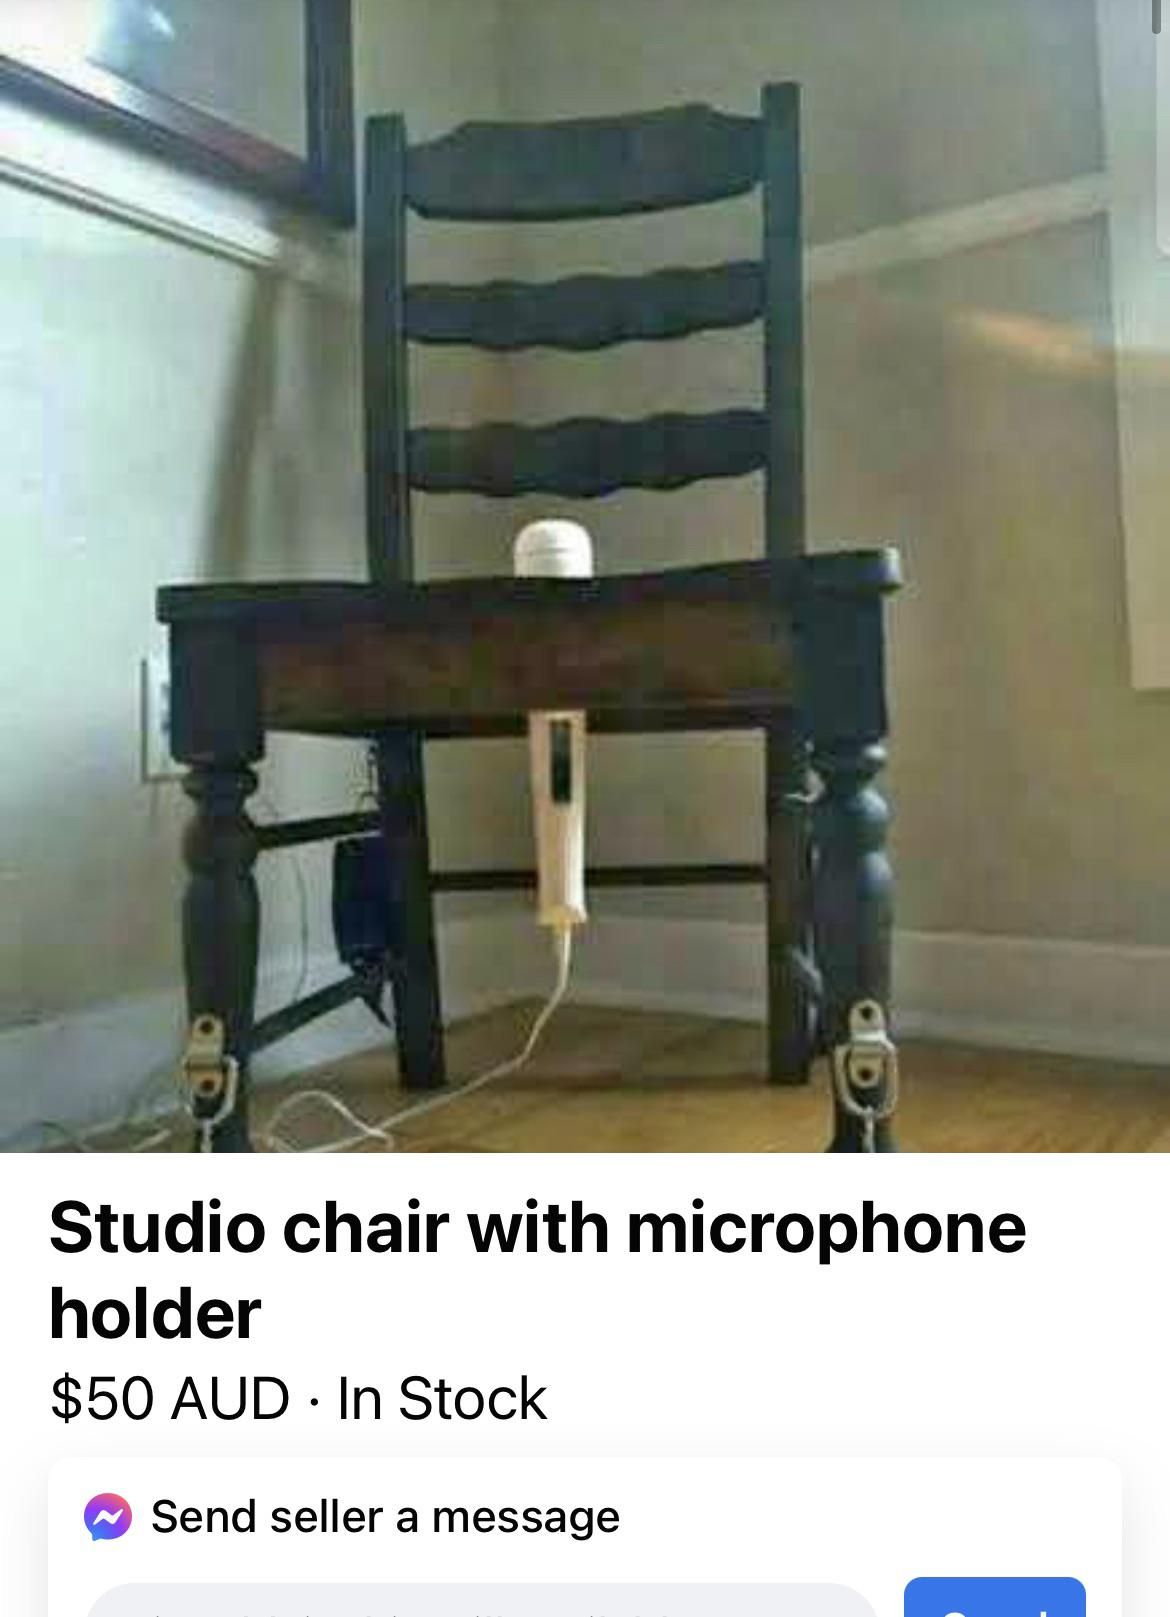 How to hit the high notes: Friend was looking for an office chair, found this on FB.